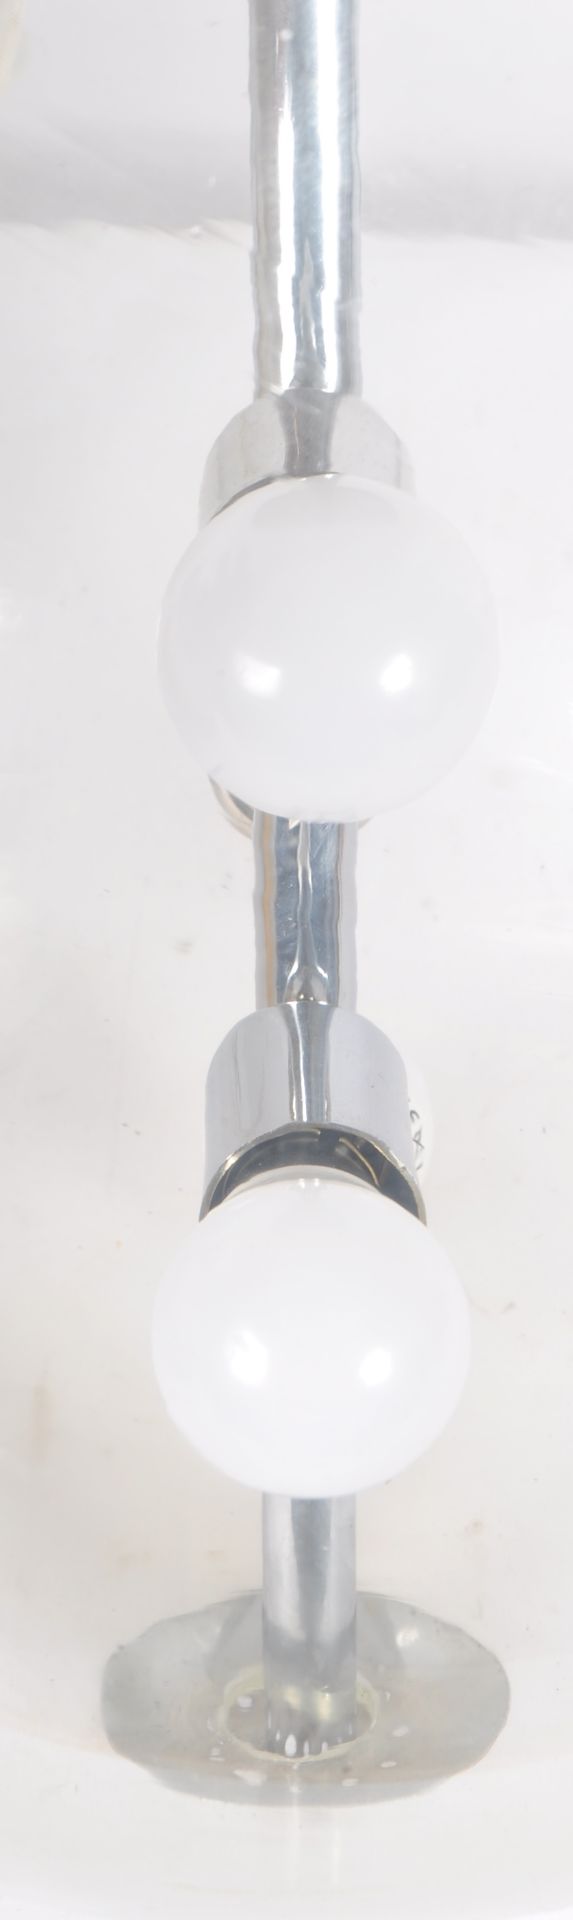 LARGE CONTEMPORARY GLOBE GLASS HANGING CEILING LIGHT - Image 6 of 6